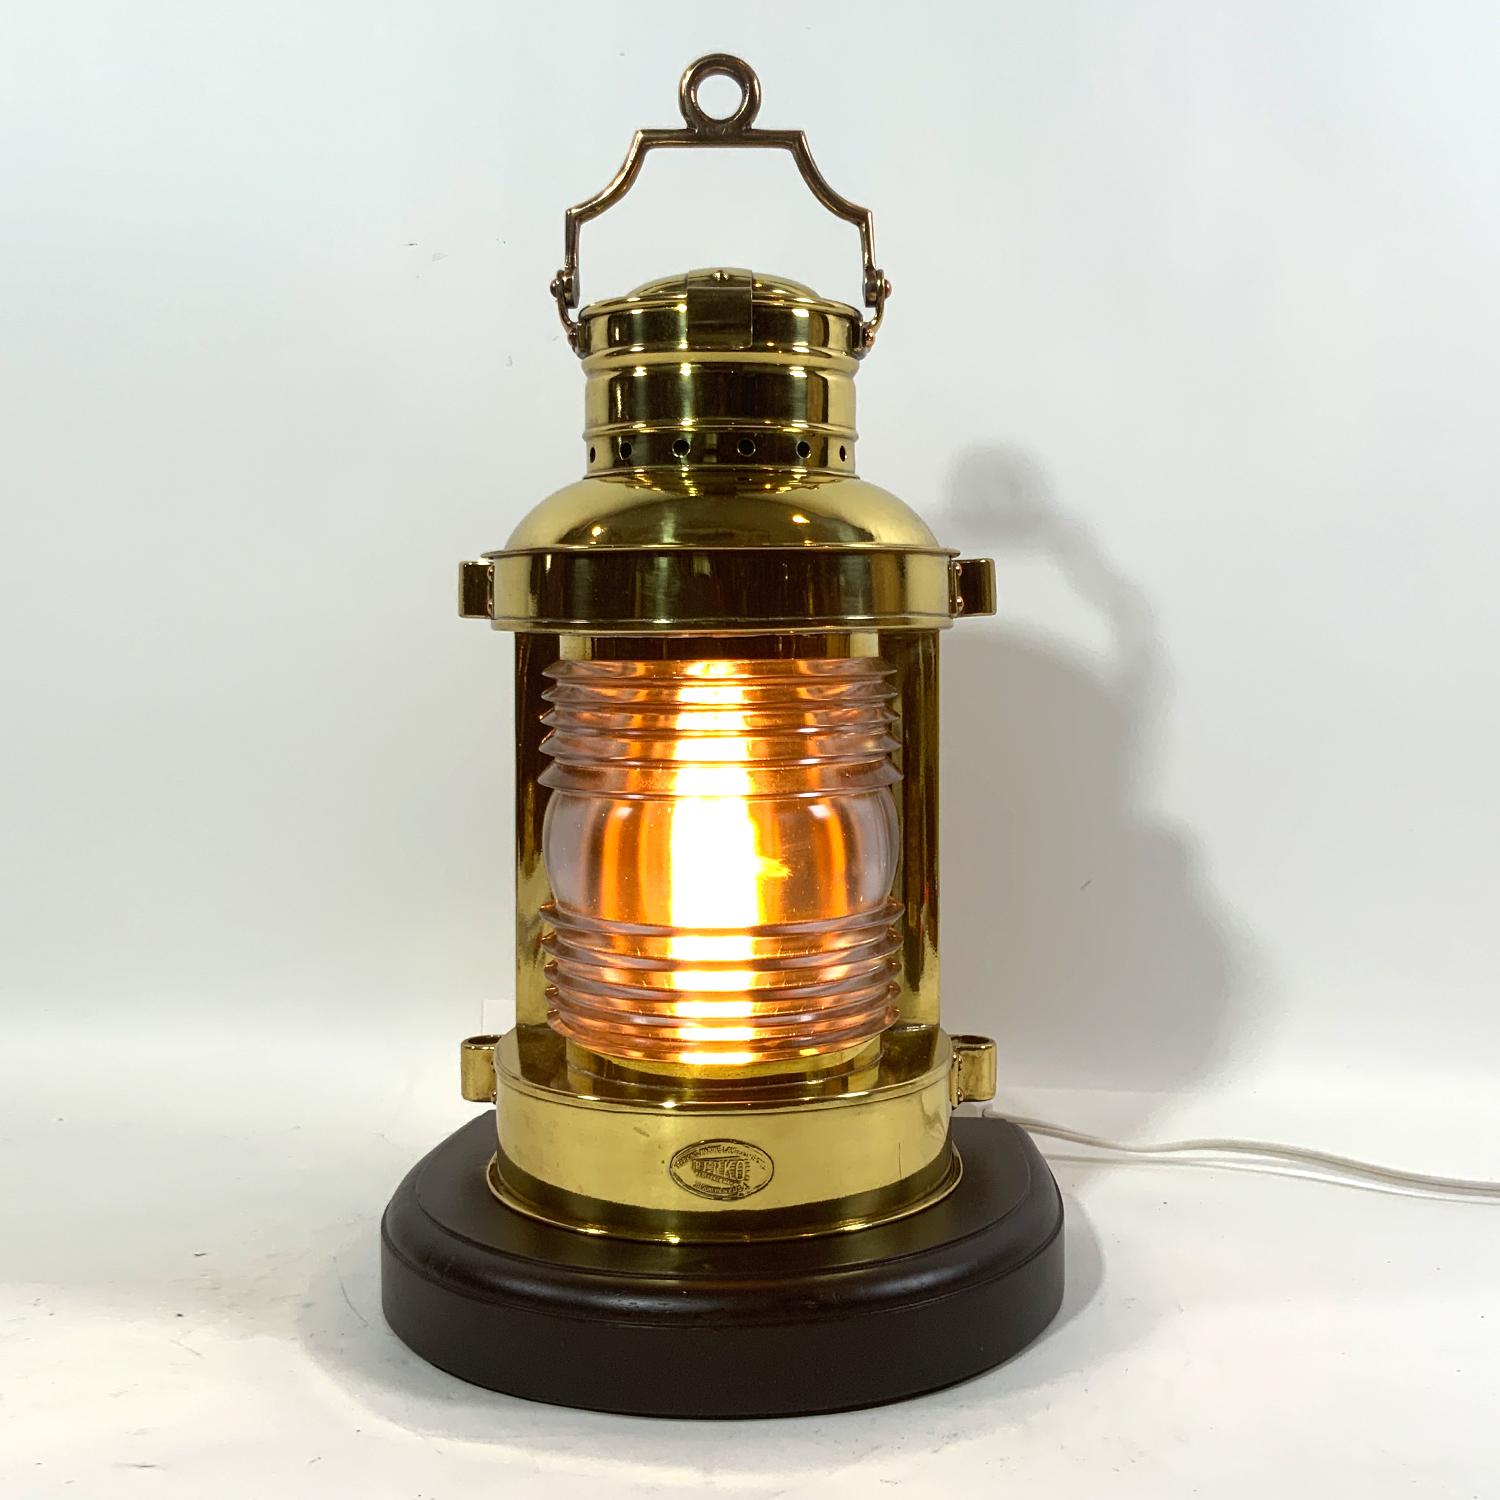 Highly polished and lacquered ship's masthead lantern by Perko. Fitted with a Fresnel lens. Mounted to a mahogany base with routed edge. Rewired for home use. Heavy carry handle. Exceptional condition. Circa 1950. Superb display.